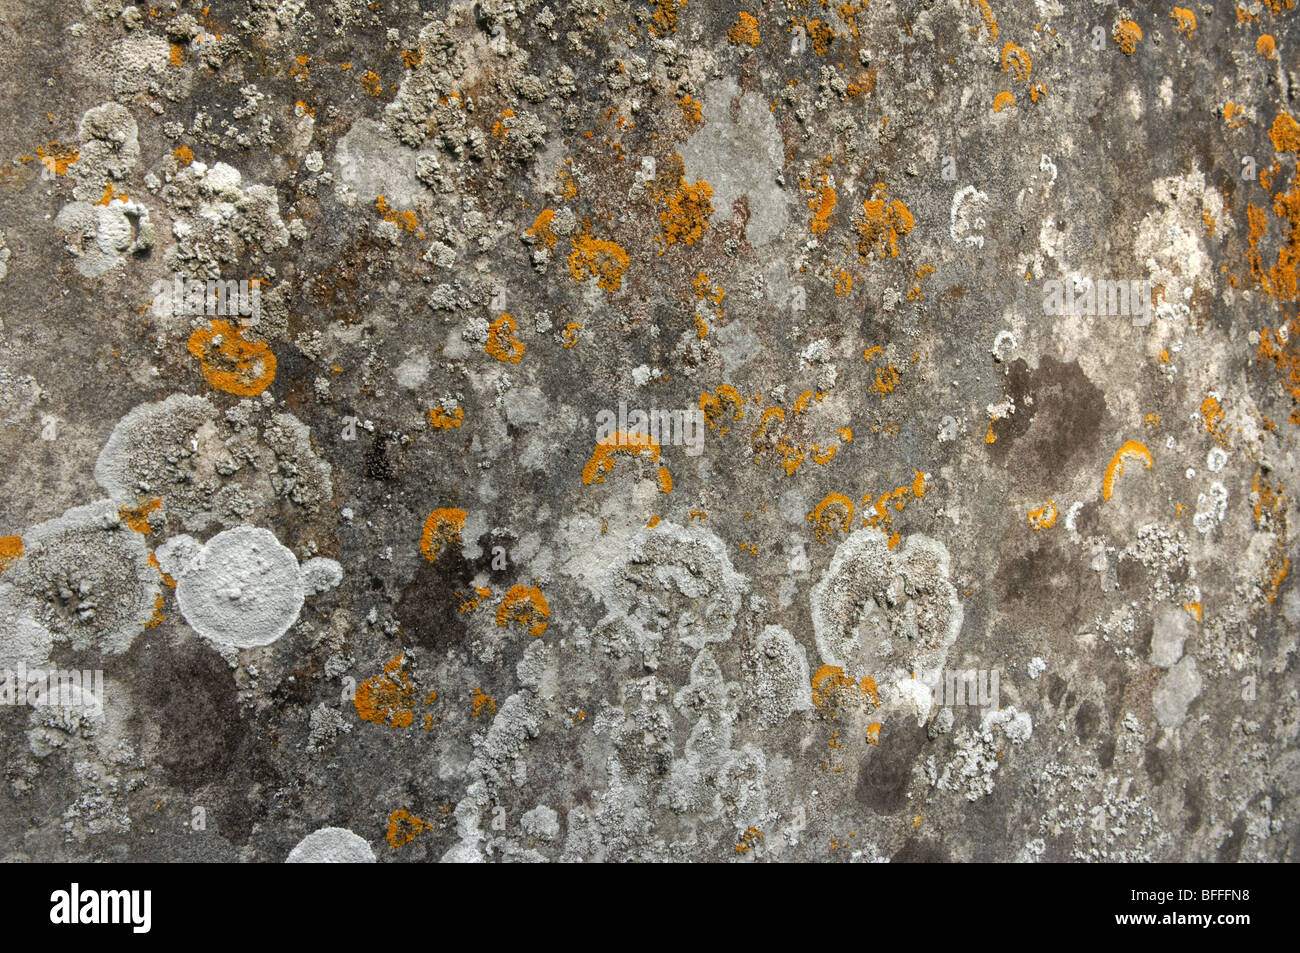 Crustose and Foliose Lichens on a Gravestone, Cemetery, Henfield, West Sussex, England. Stock Photo